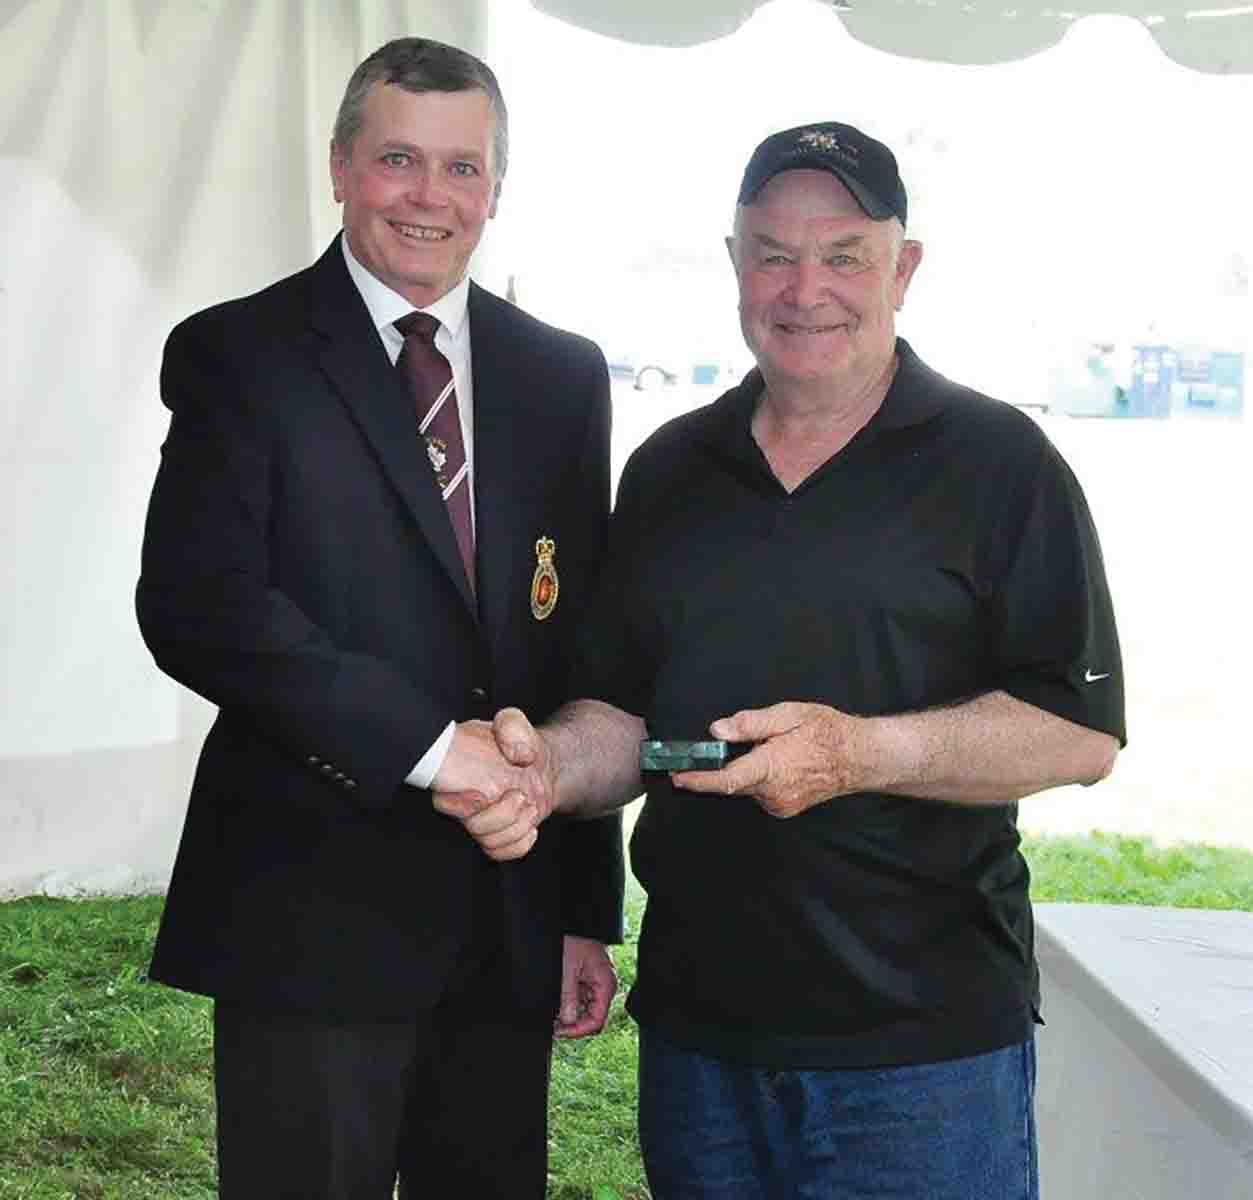 Sandy Post receiving the bronze for the 1,000-yard Match from Don Haisell.